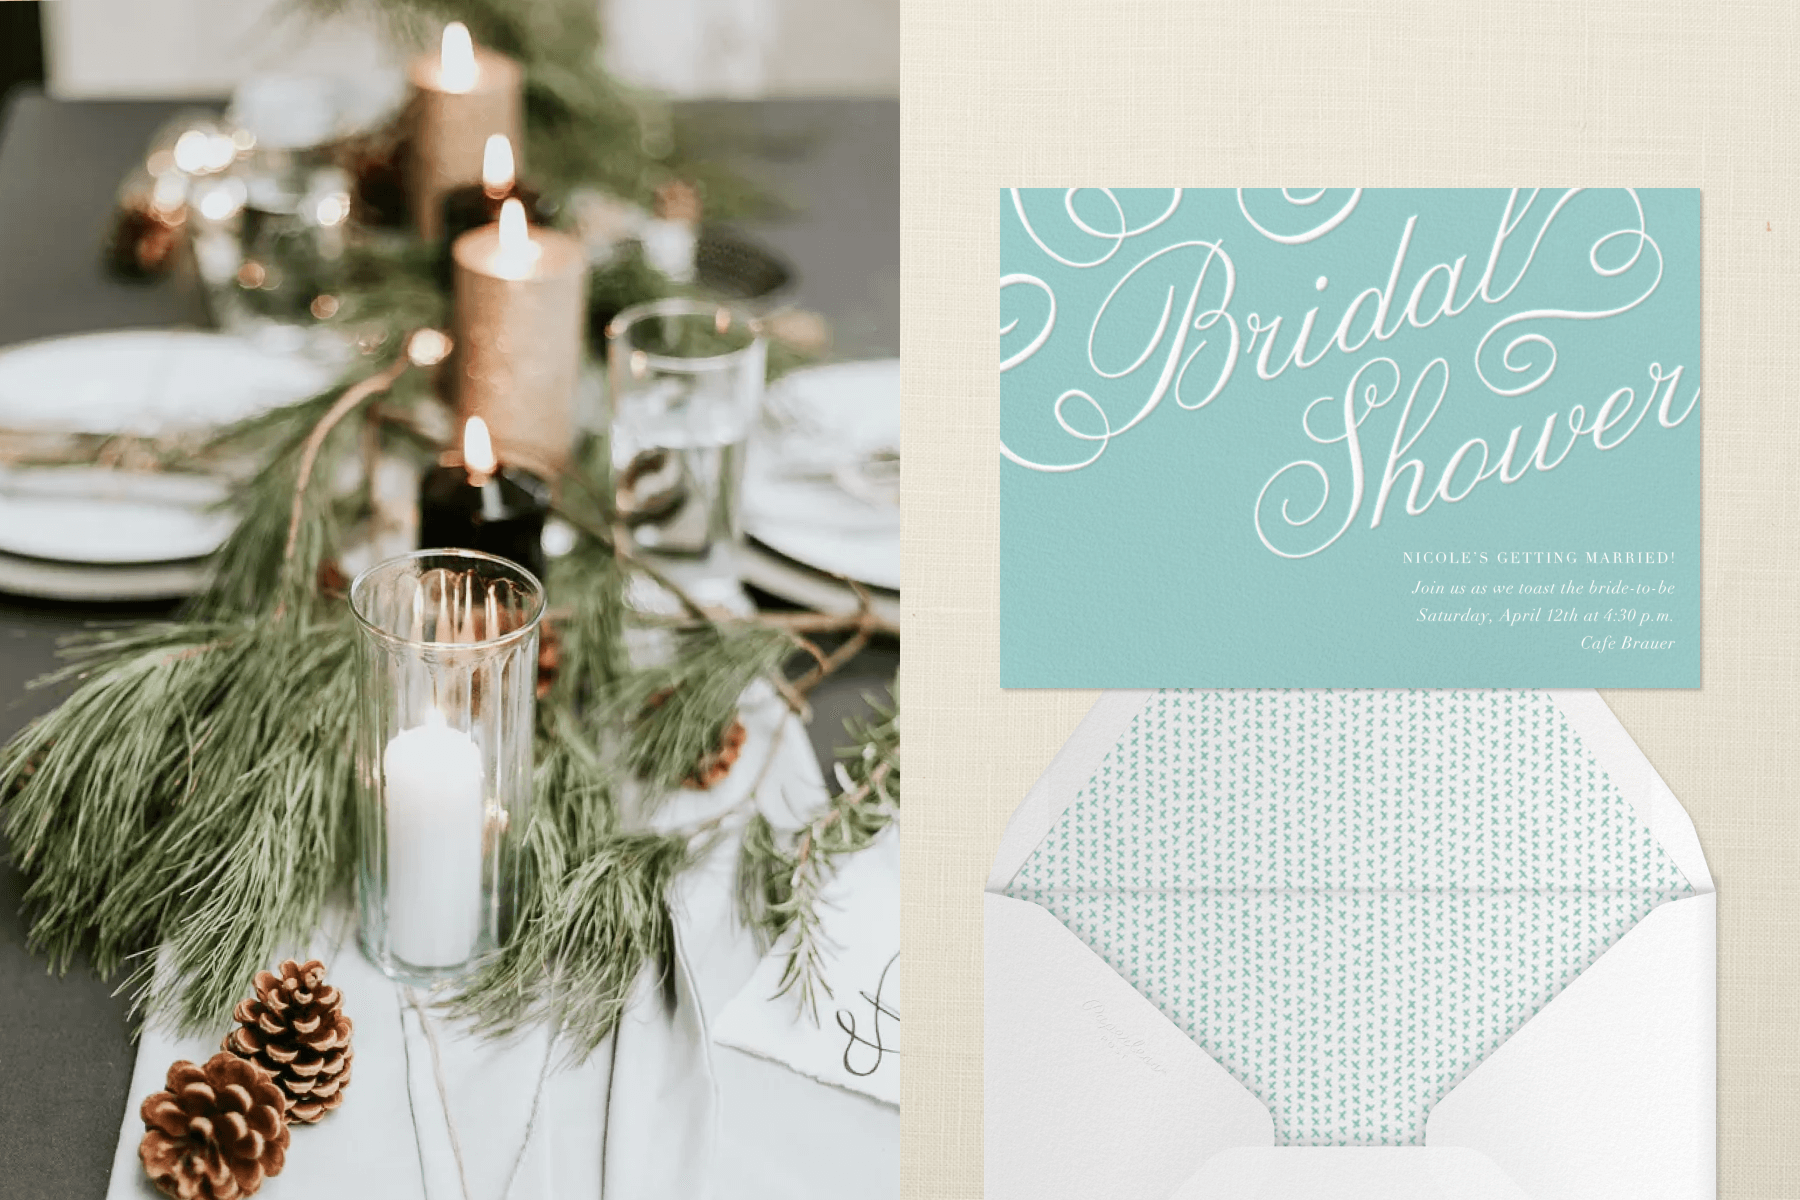 Left: A tablescape with fir tree branches, pinecones, and pillar candles. Right: A robin’s egg blue bridal shower invitation with the words ‘Bridal Shower’ in white script.